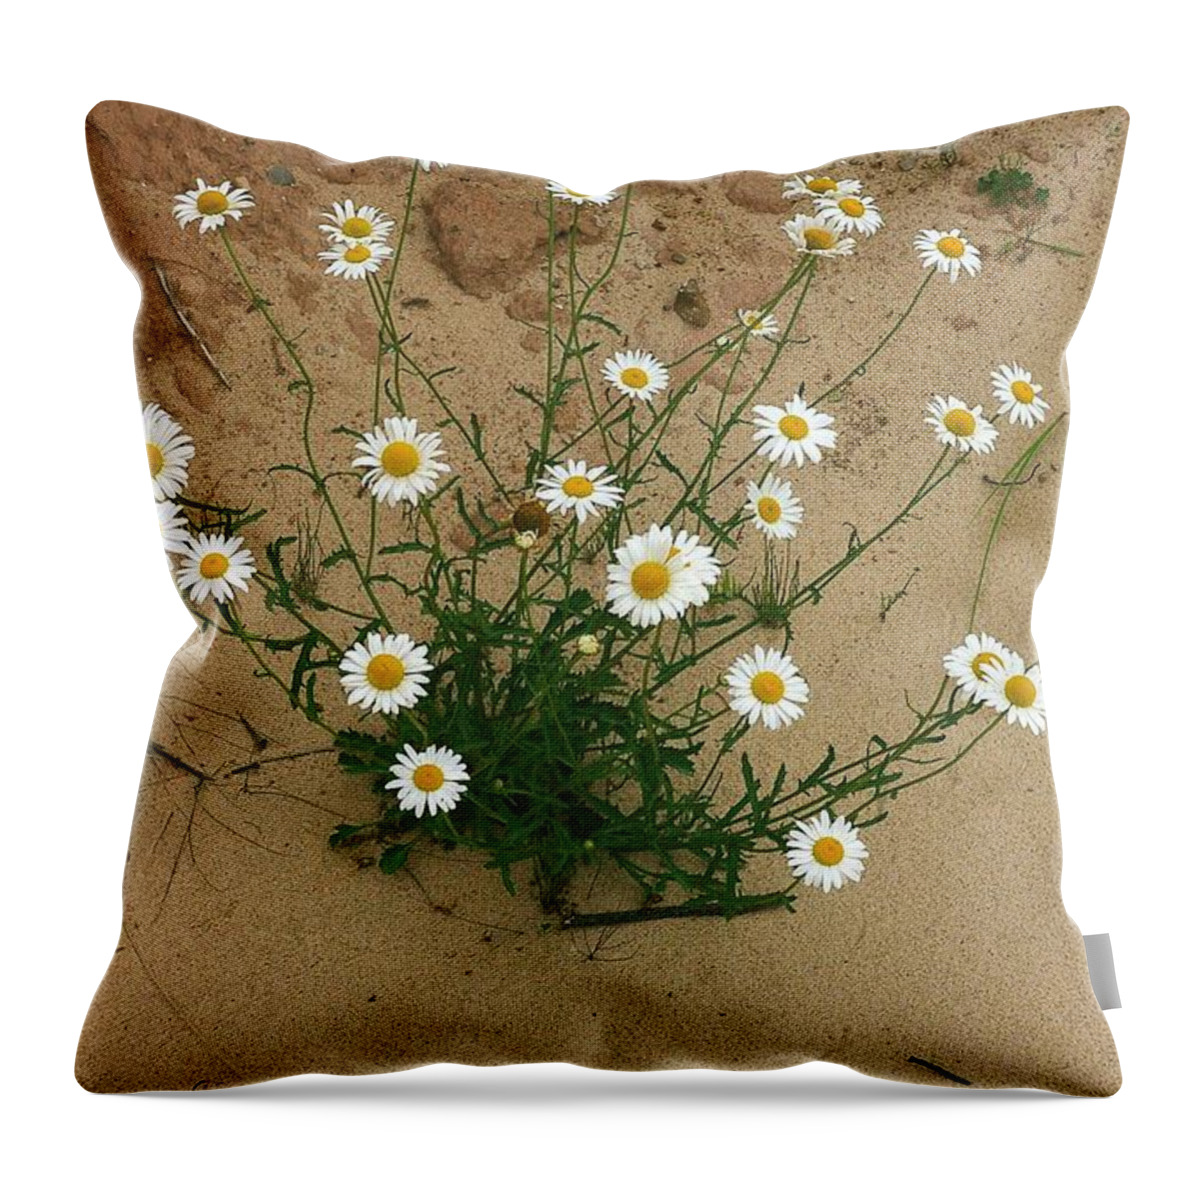 Daisies Throw Pillow featuring the photograph Daisies in the Sand by Randy Pollard